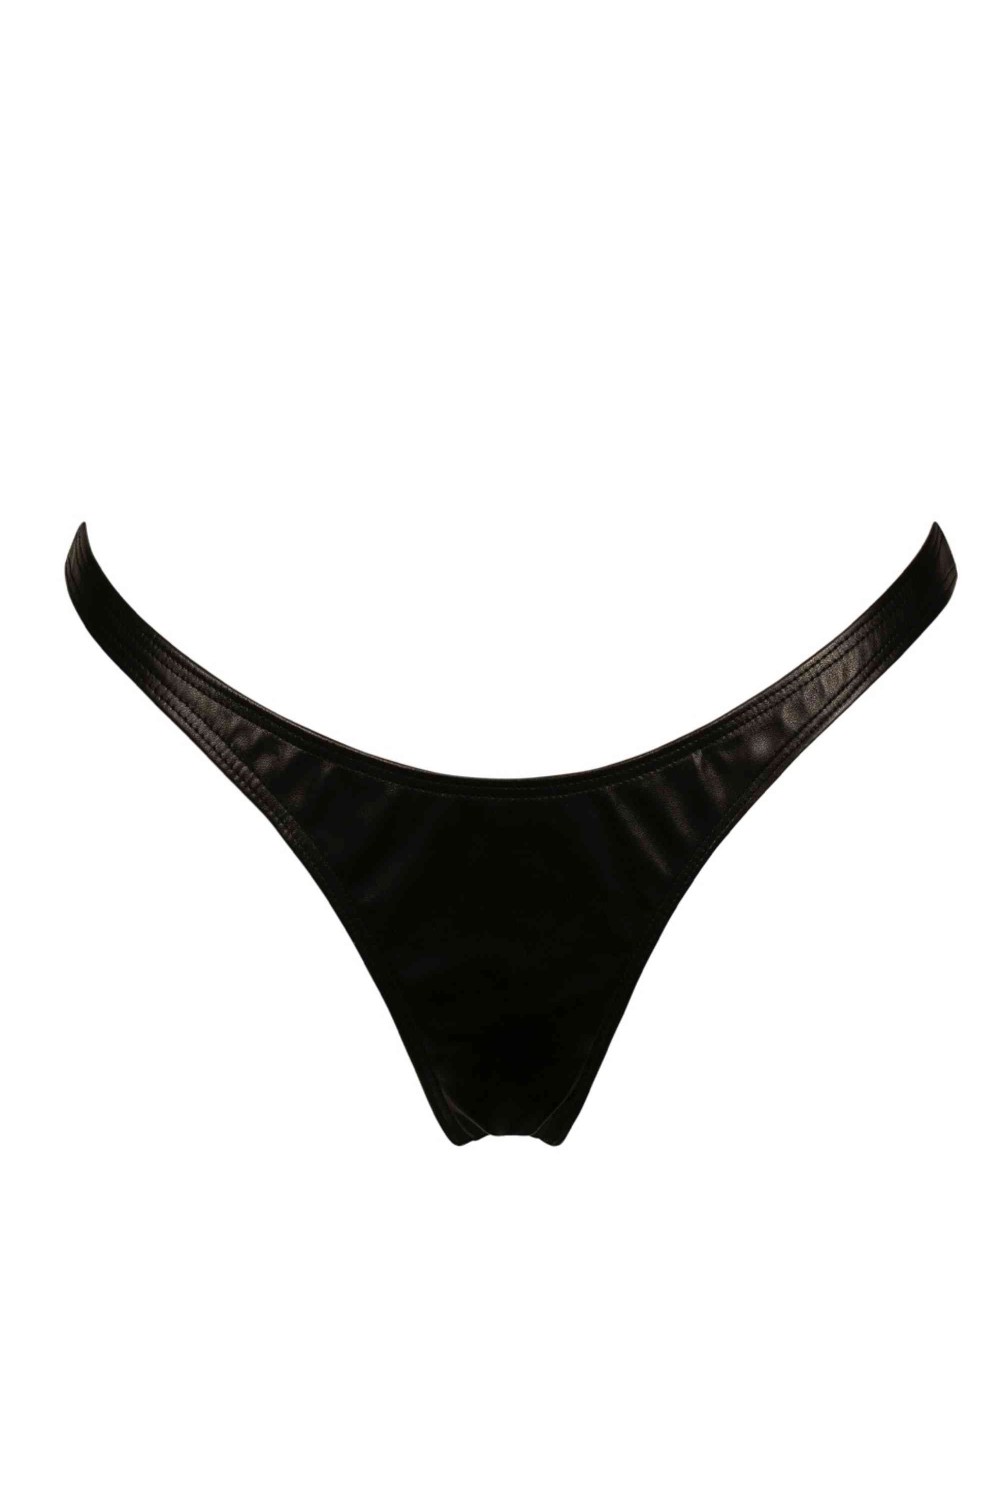 Womens Sexy Wet Look Lingerie Underwear Faux Leather Panties G-String Briefs